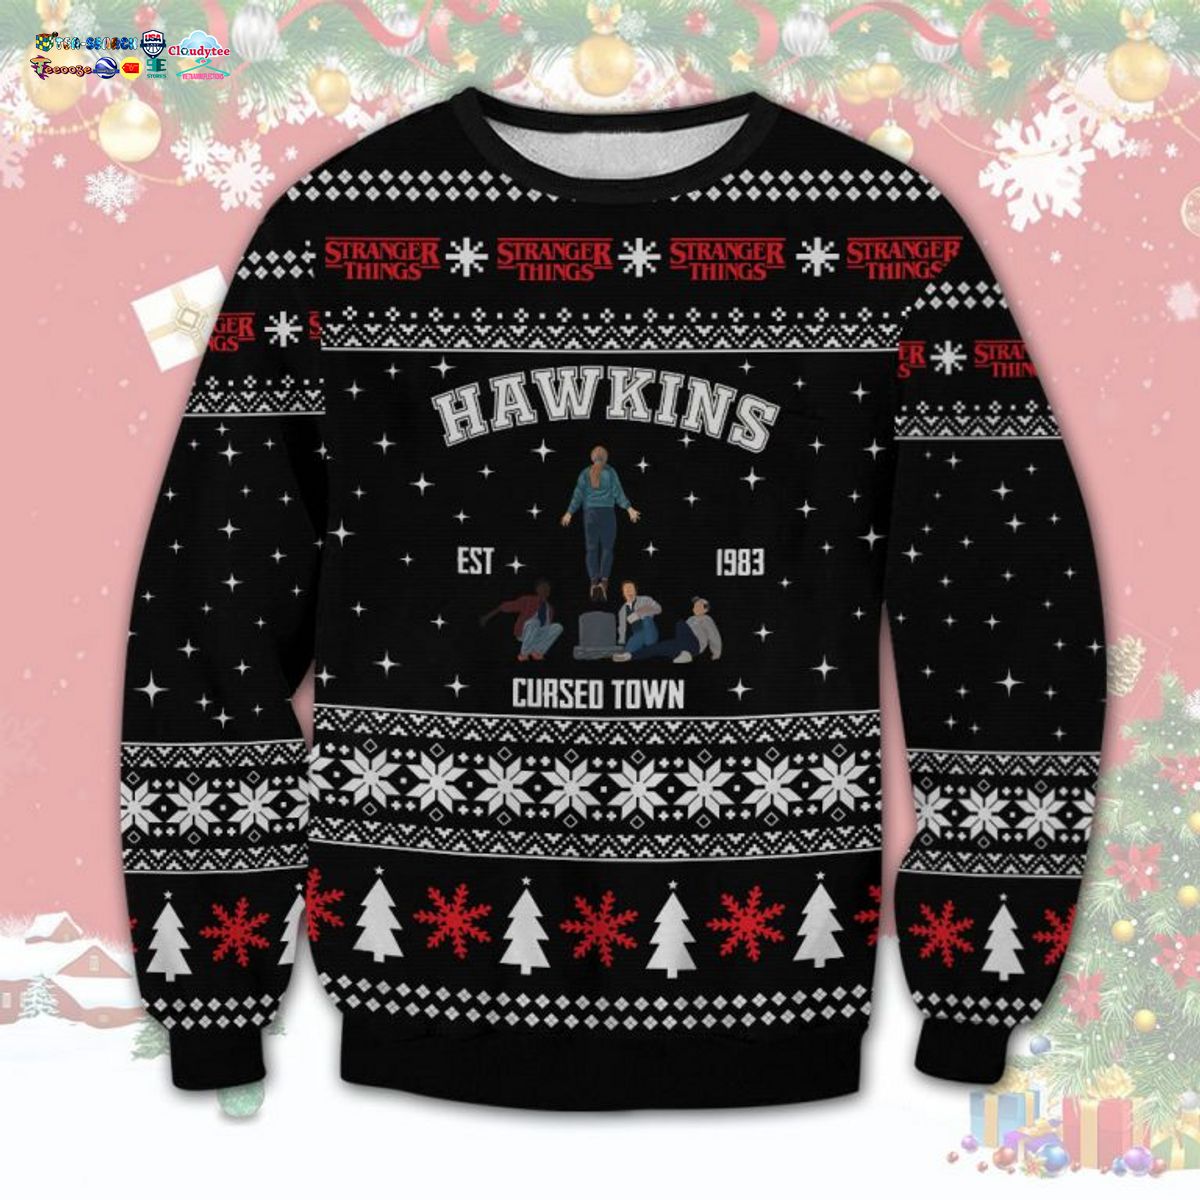 Stranger Things Hawkins Cursed Town Ugly Christmas Sweater